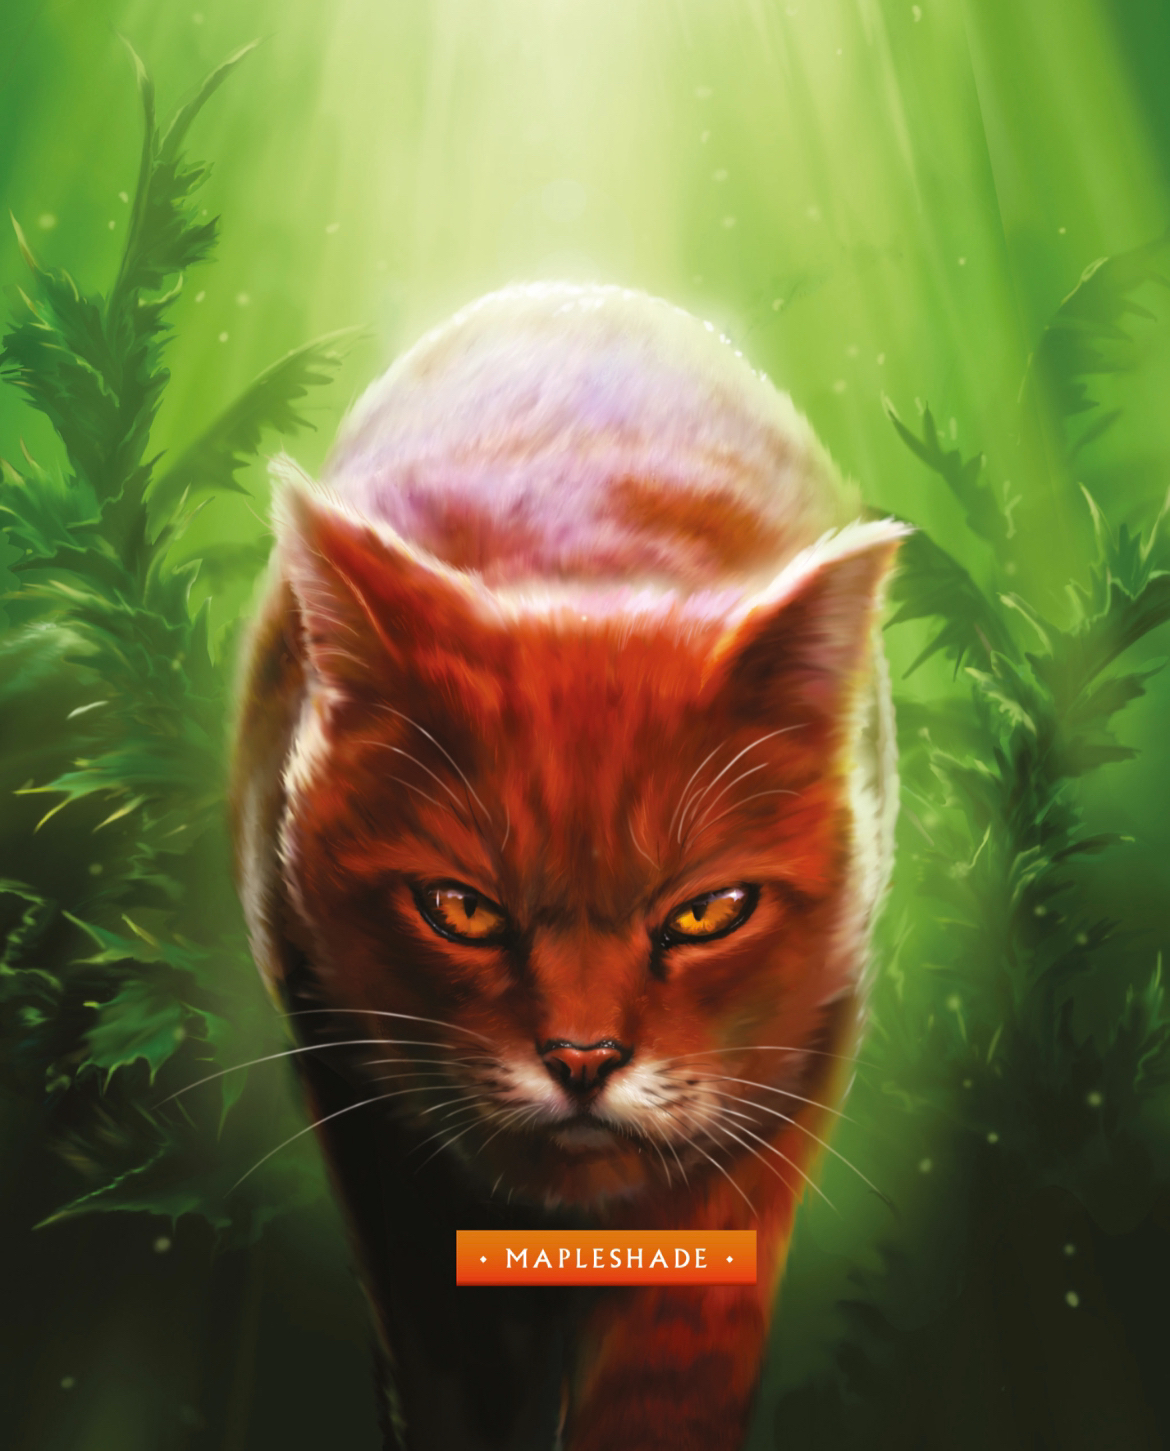 Pixilart - some warrior cats characters by Anonymous